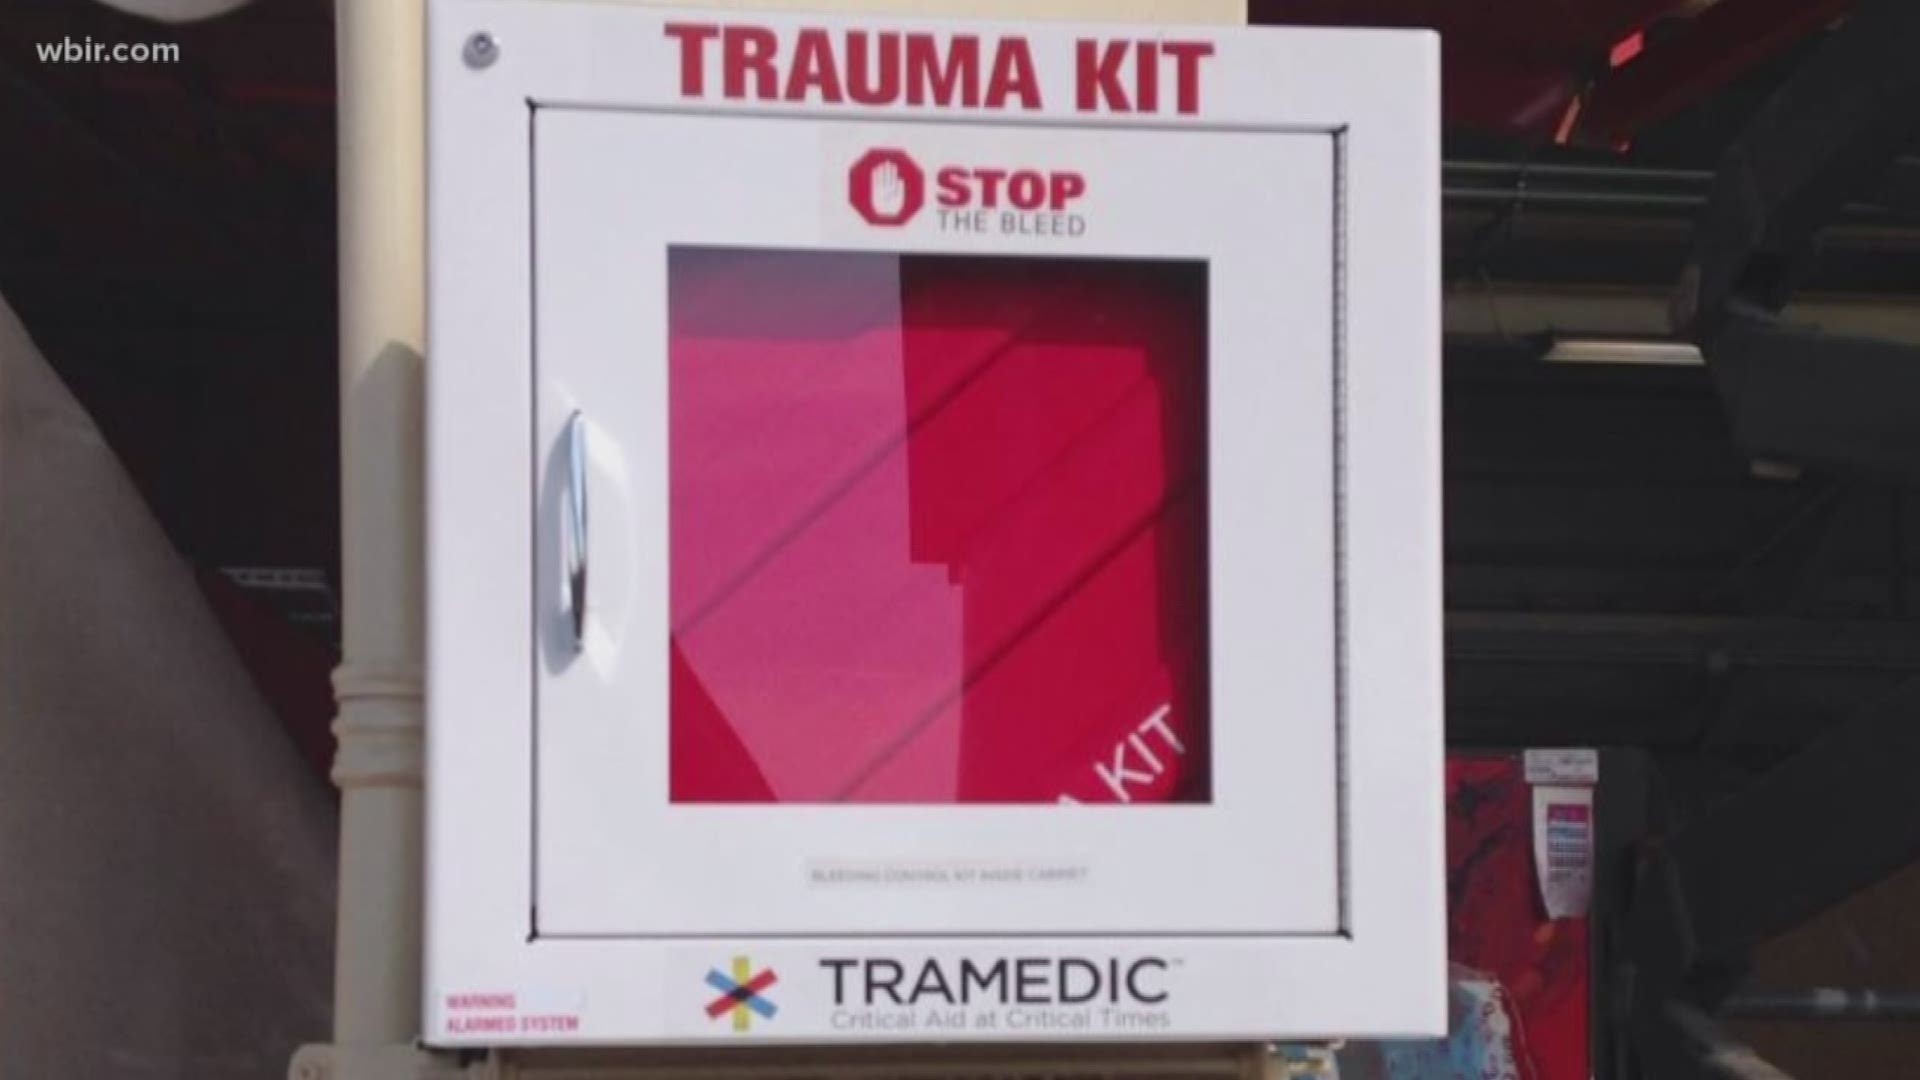 The push to be prepared for anything has made its way to the University of Tennessee with 'Stop the Bleed' kits dispersed around campus.